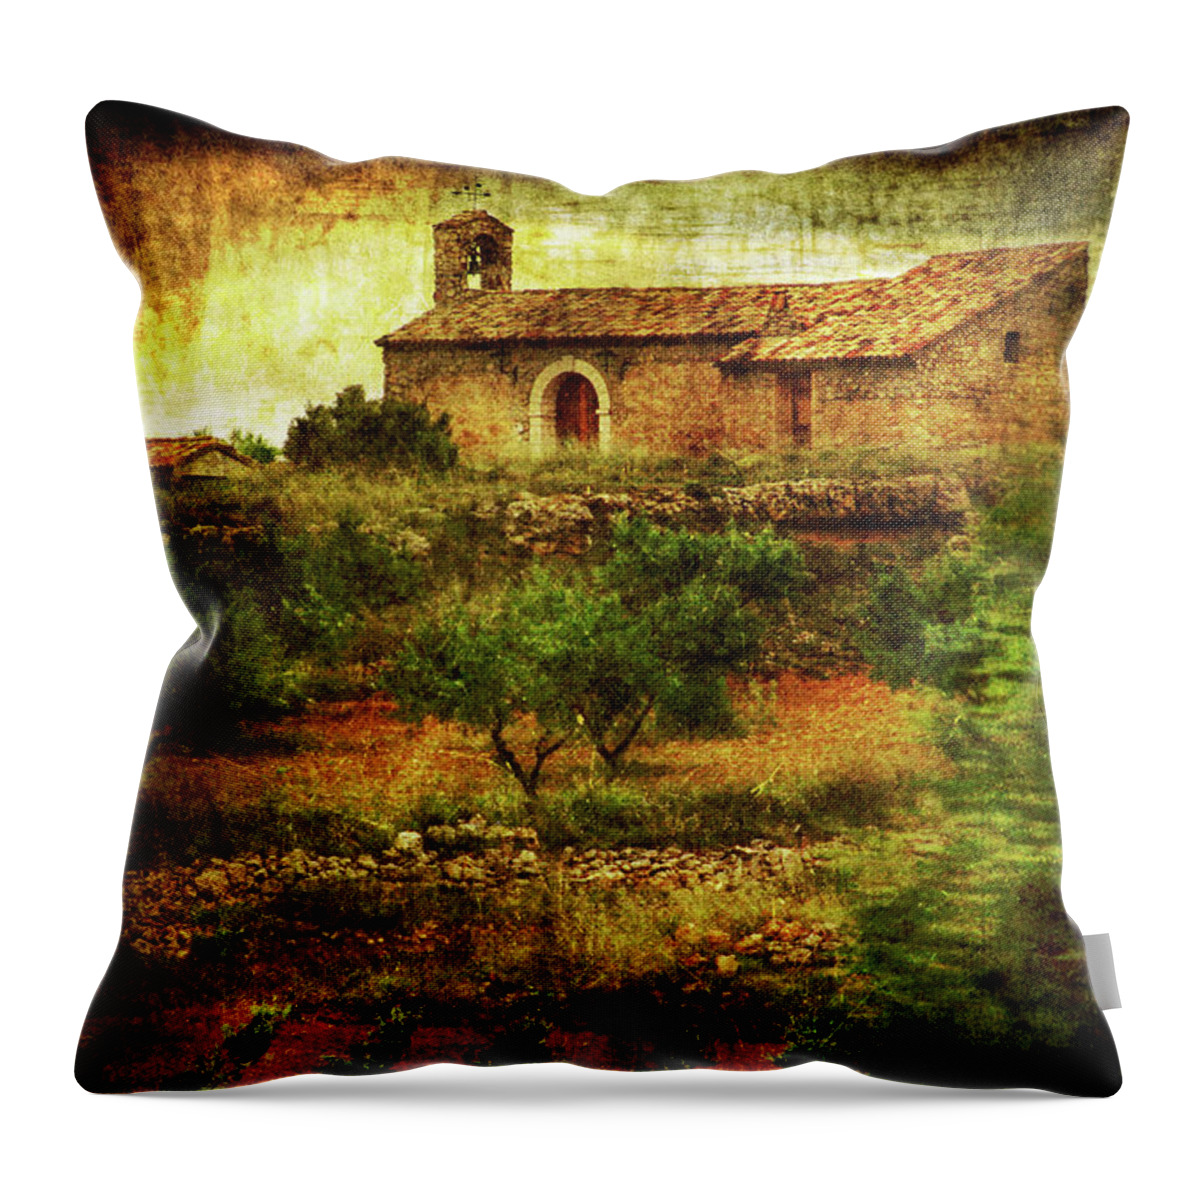 Building Throw Pillow featuring the photograph Continuance by Andrew Paranavitana